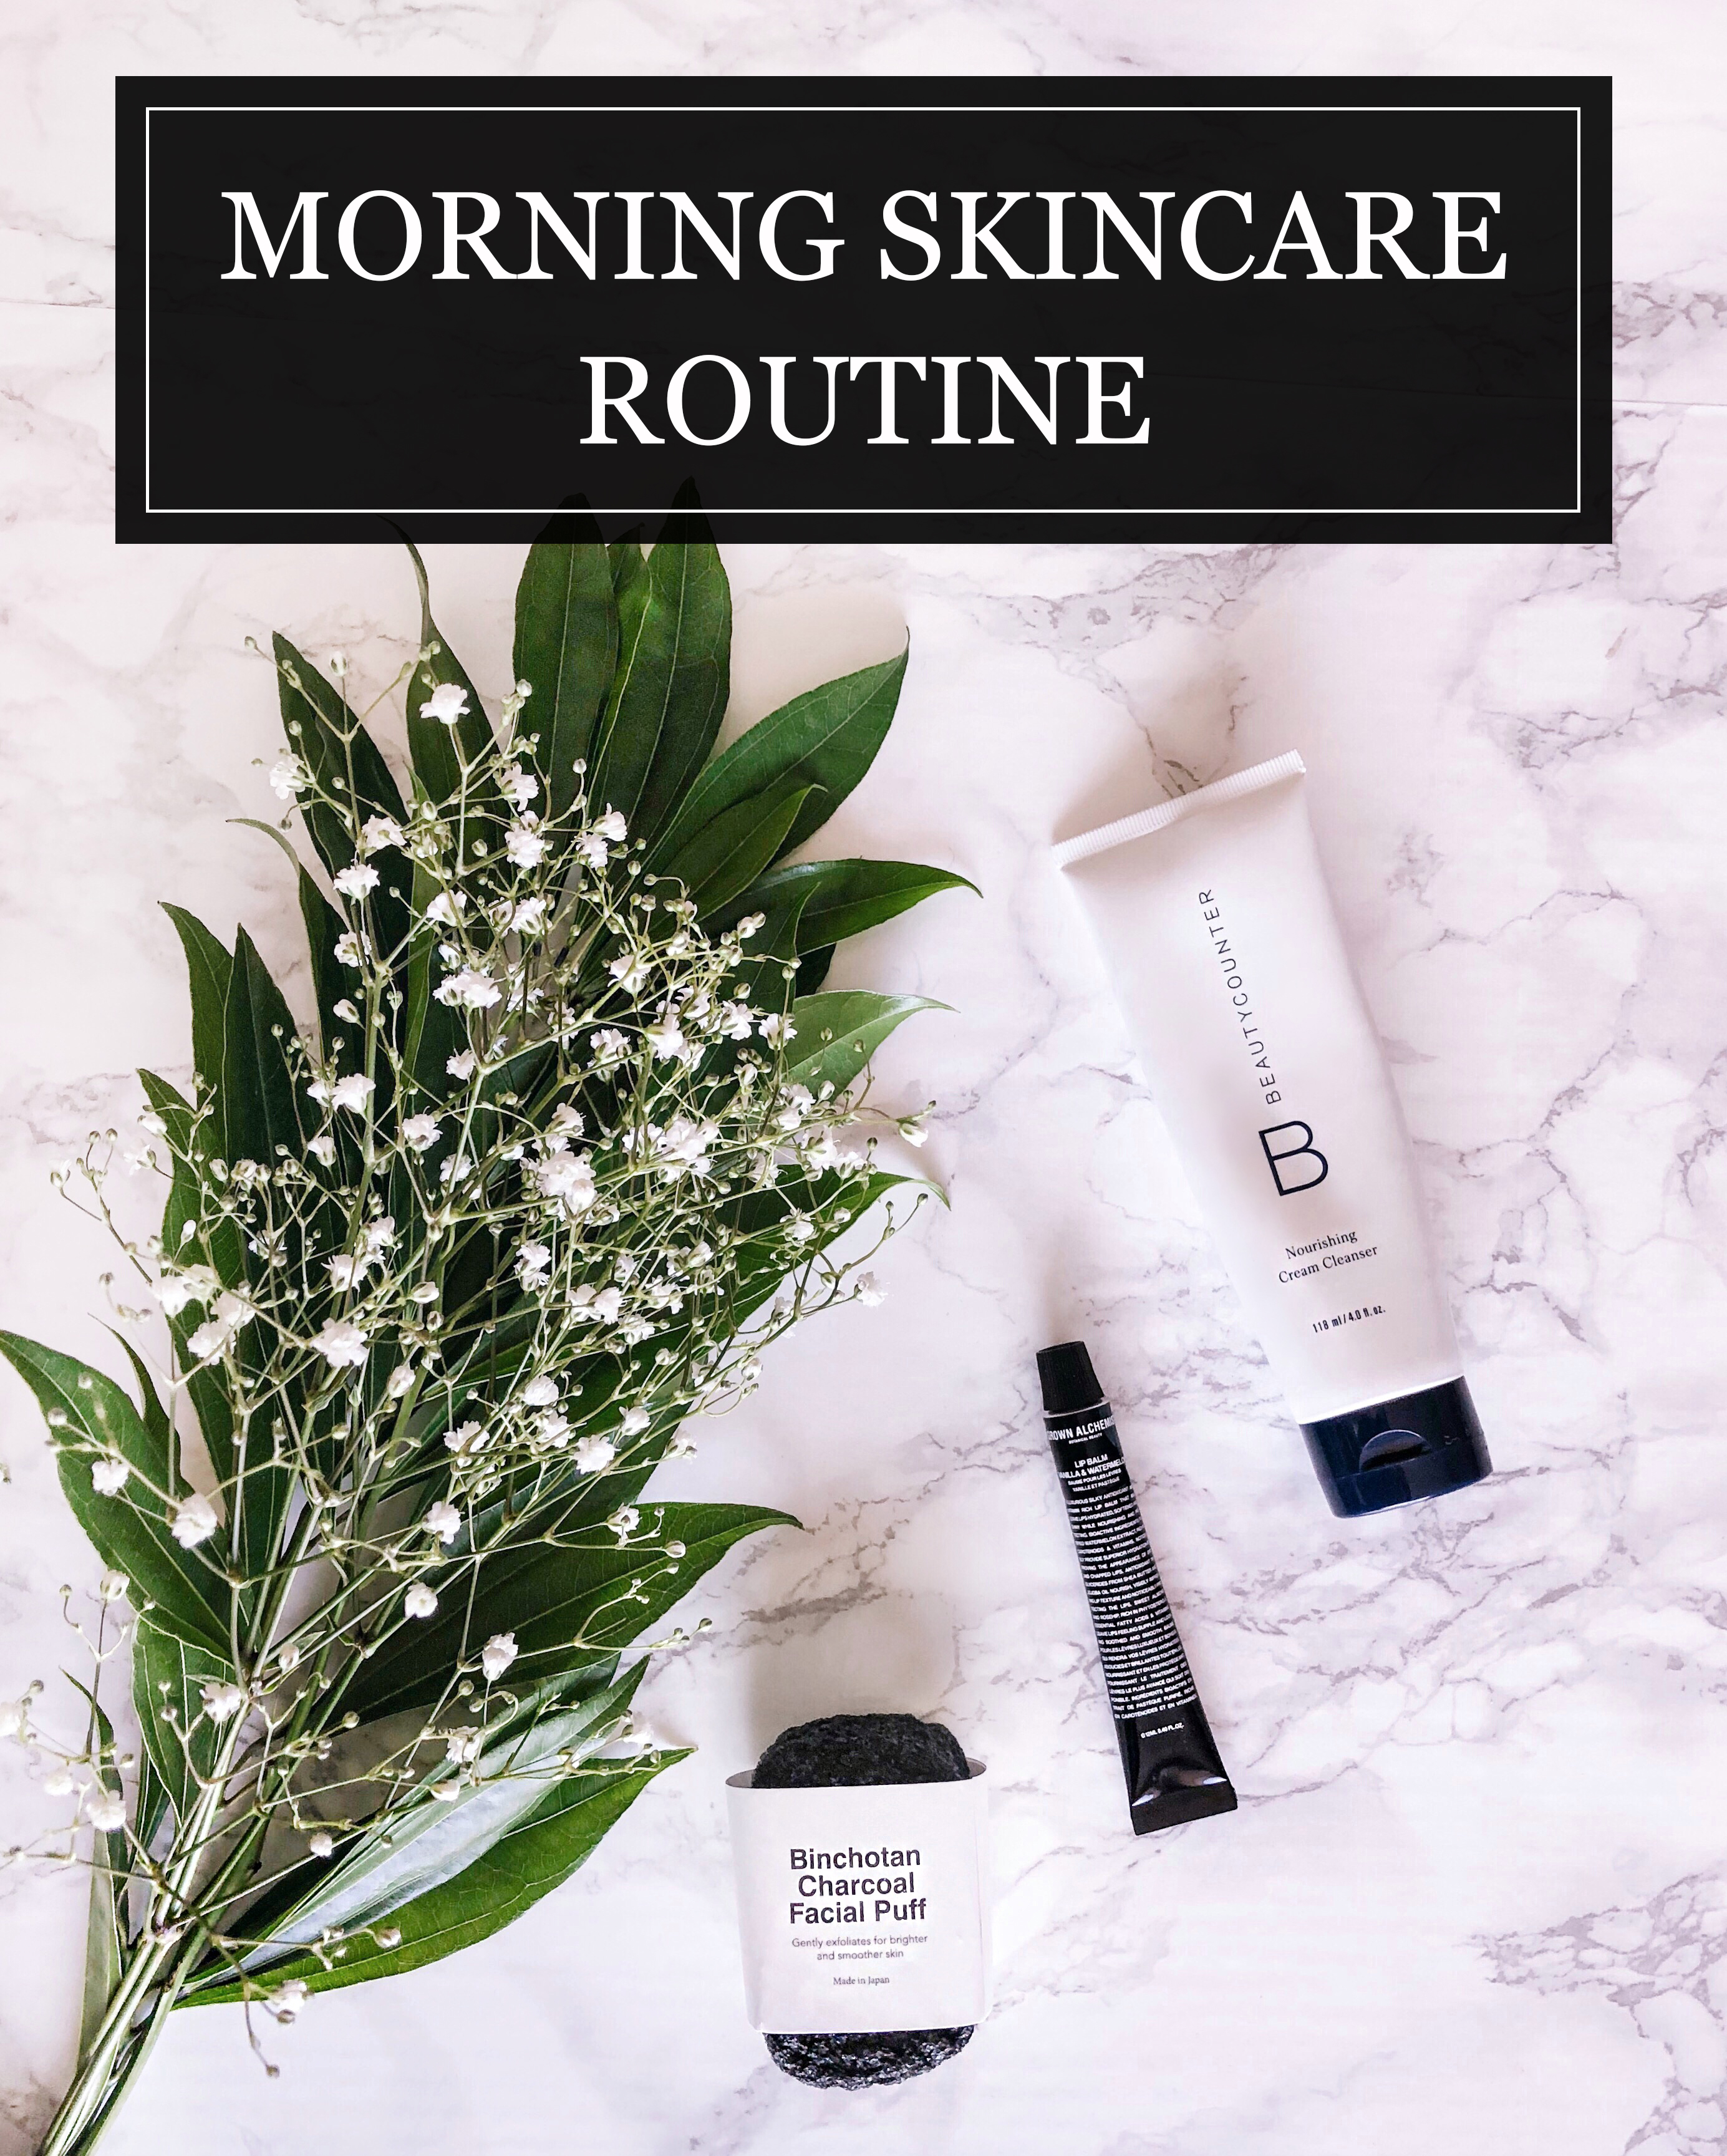 morning skincare routine for a fresh face - Morning Skin Care Routine by popular Chicago beauty blogger Visions of Vogue